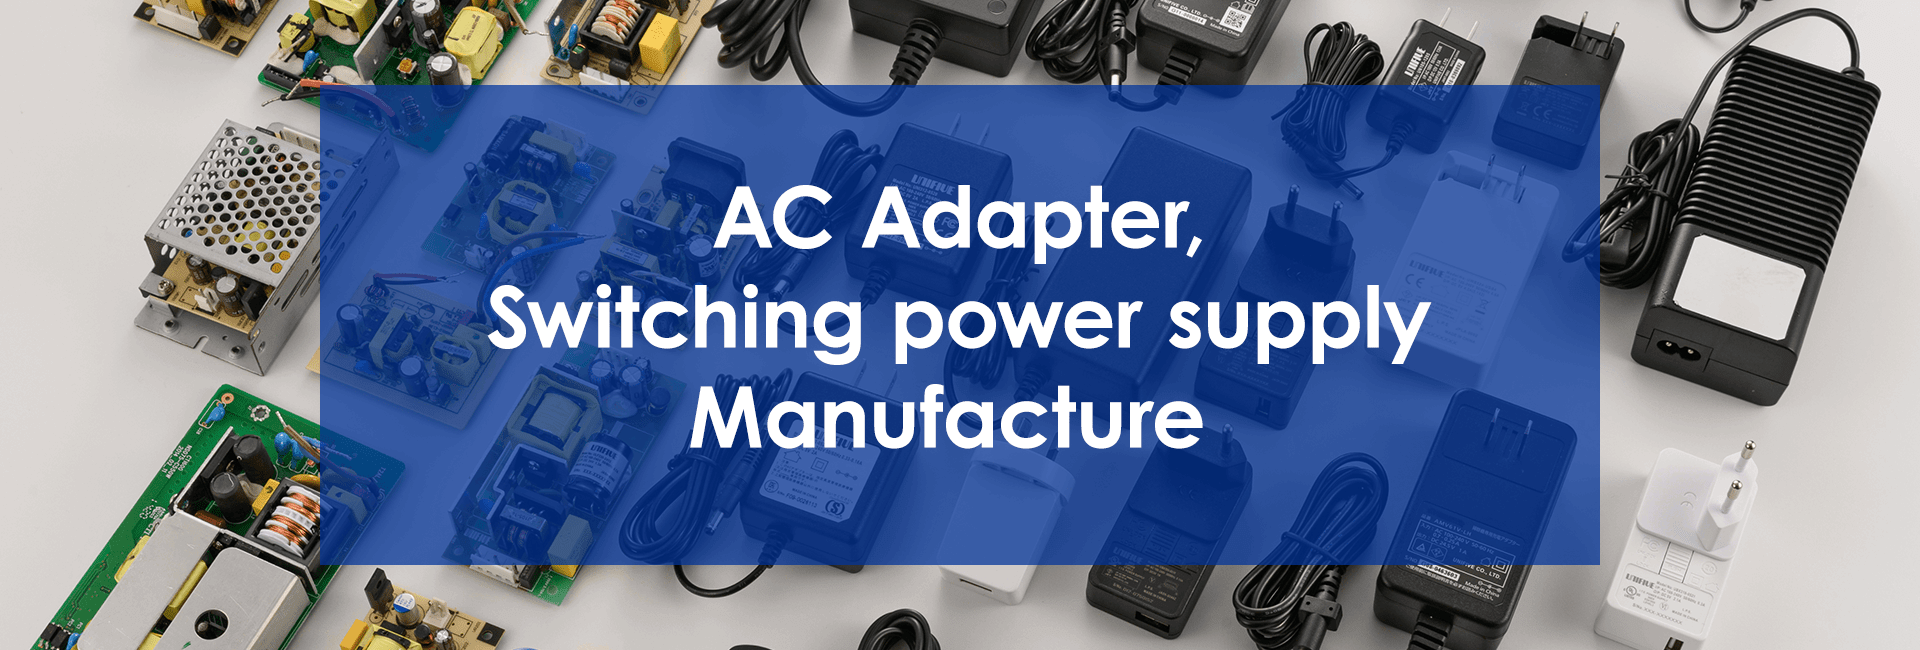 UNIFIVE｜Ac power adapter & Switching power supply manufacturers